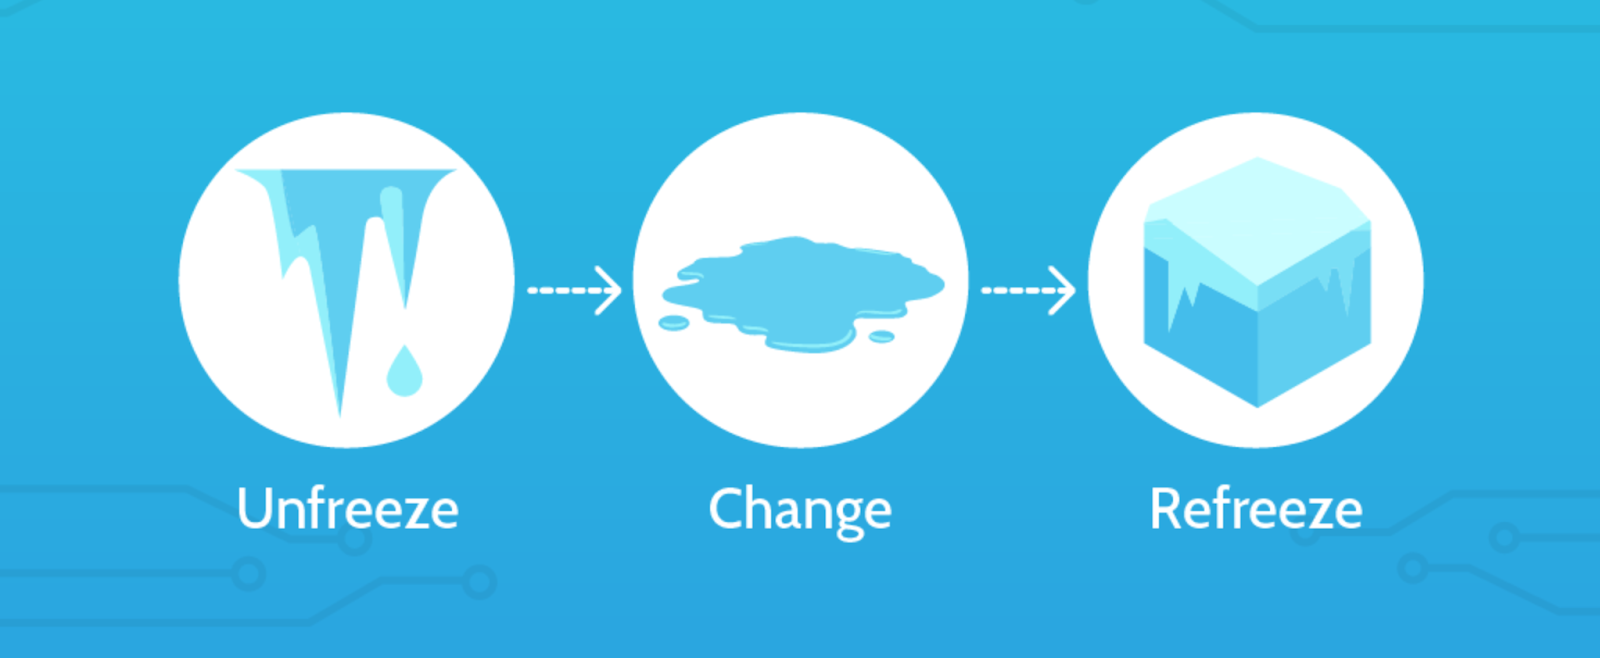 8 Proven Change Management Models To Scale Like A Pro